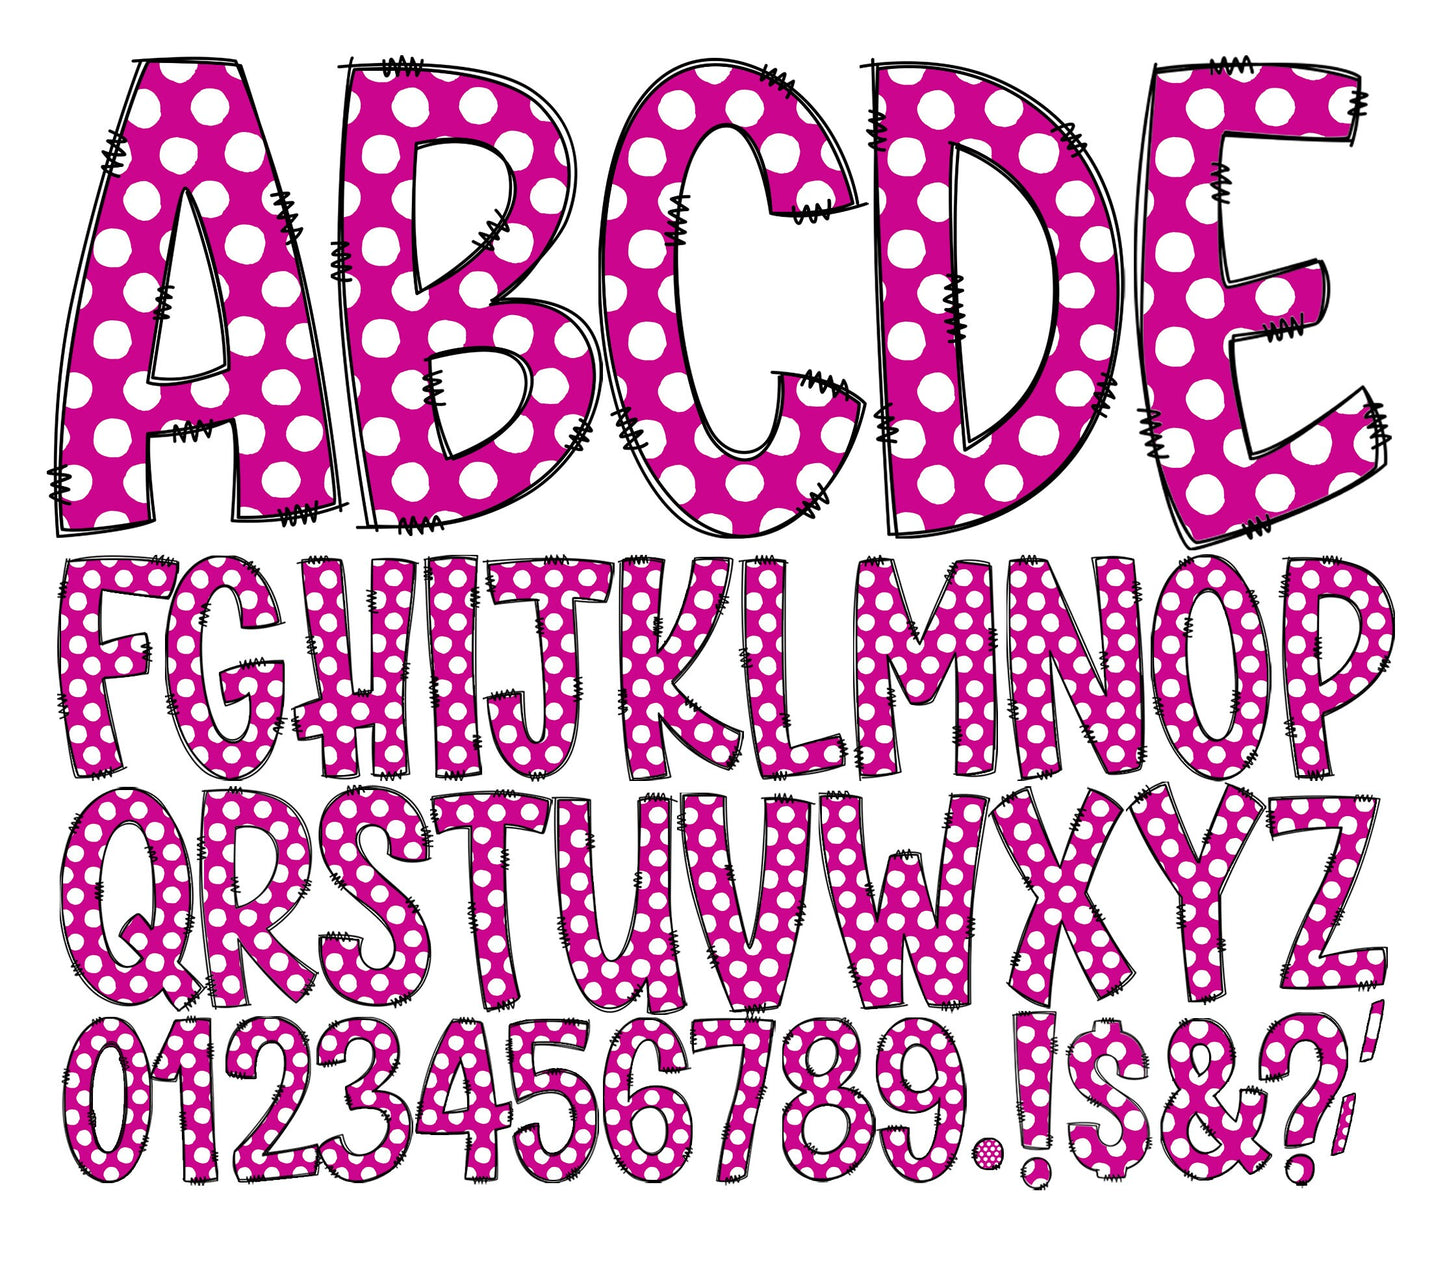 100 MEGA BUNDLE - Doodle Letters! 100 Polka Dot Colours Uppercase & Lowercase, Entire Doodle Alphabet, Numbers, Individually Saved PNG